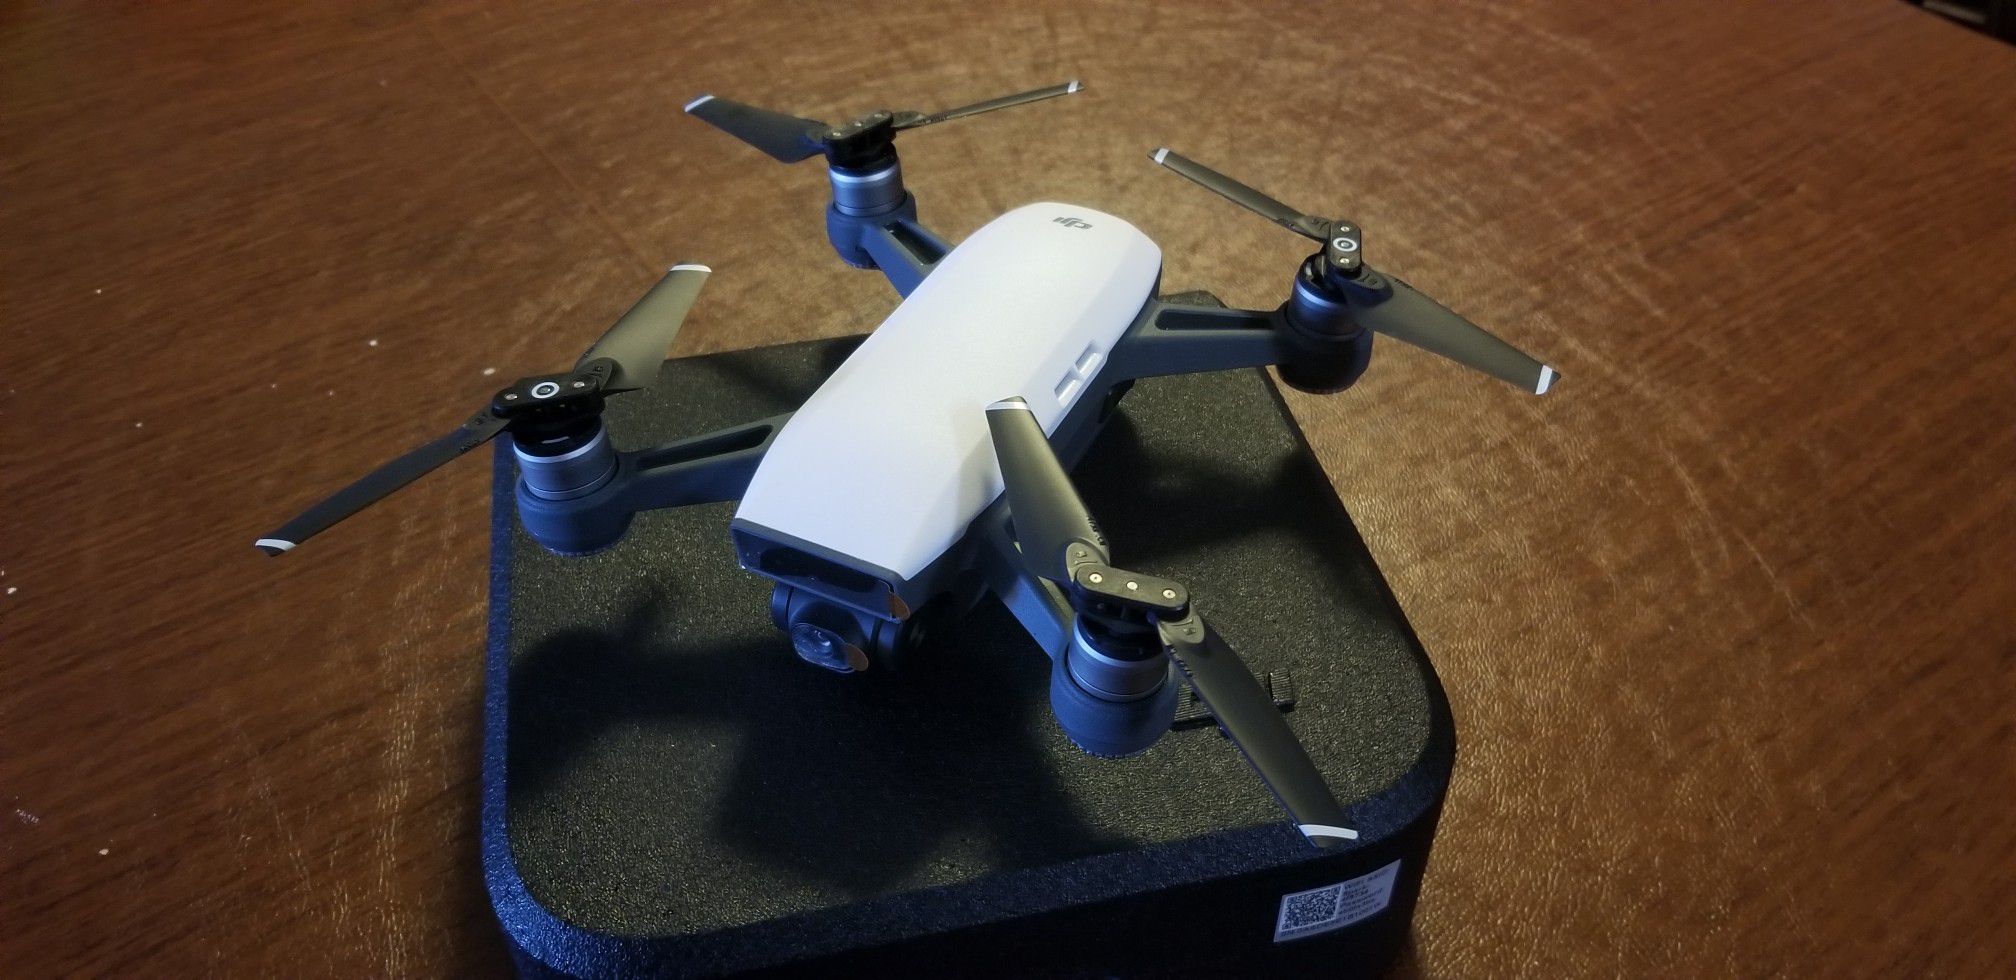 Dji spark new never been fly